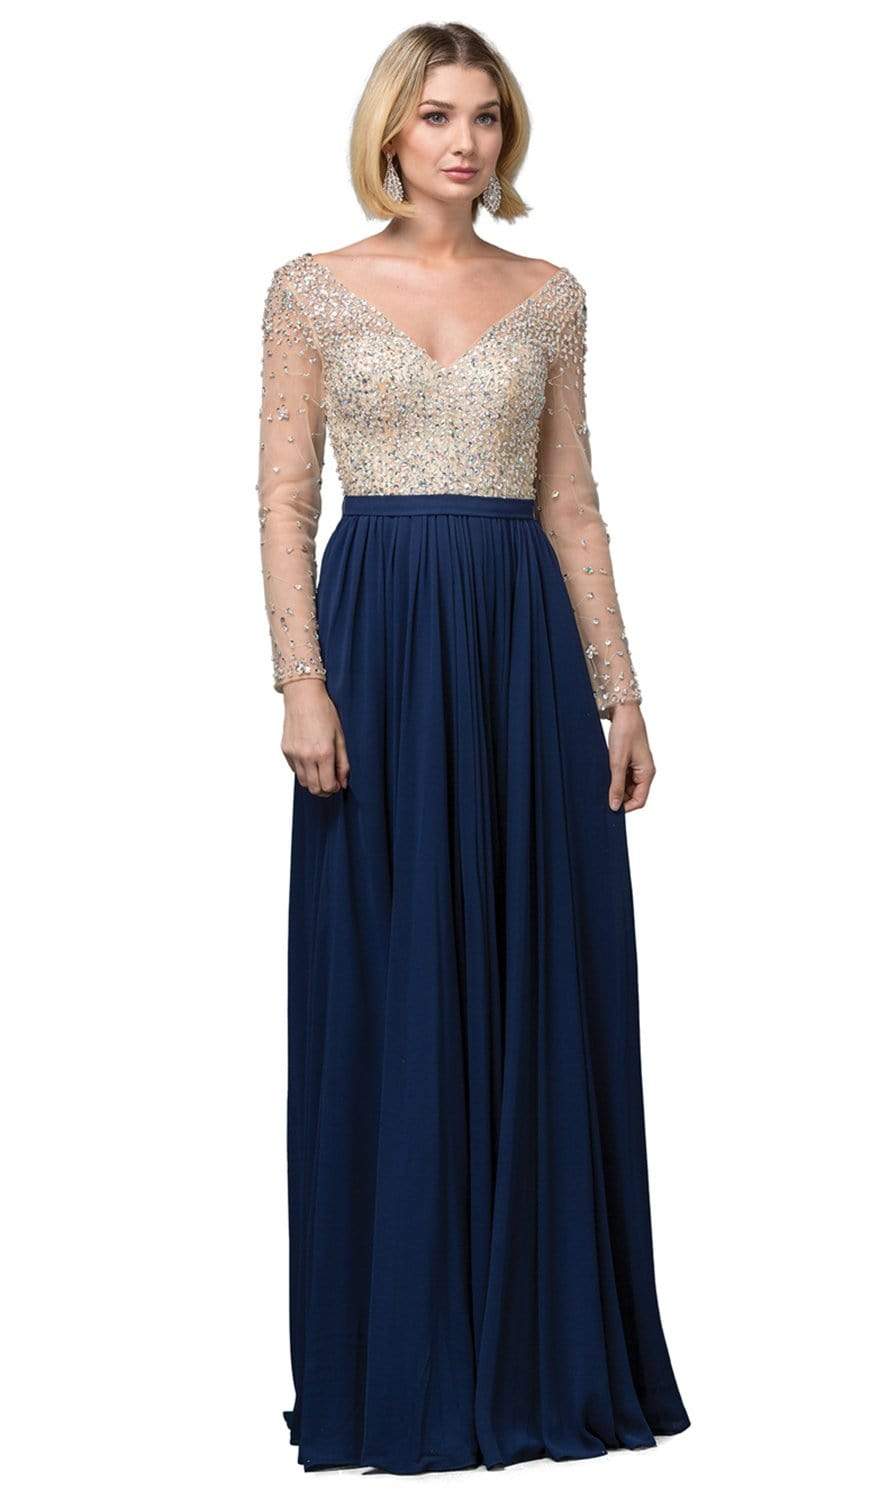 Dancing Queen - 2839 Long Sleeve Beaded Bodice A-Line Dress Prom Dresses XS / Navy